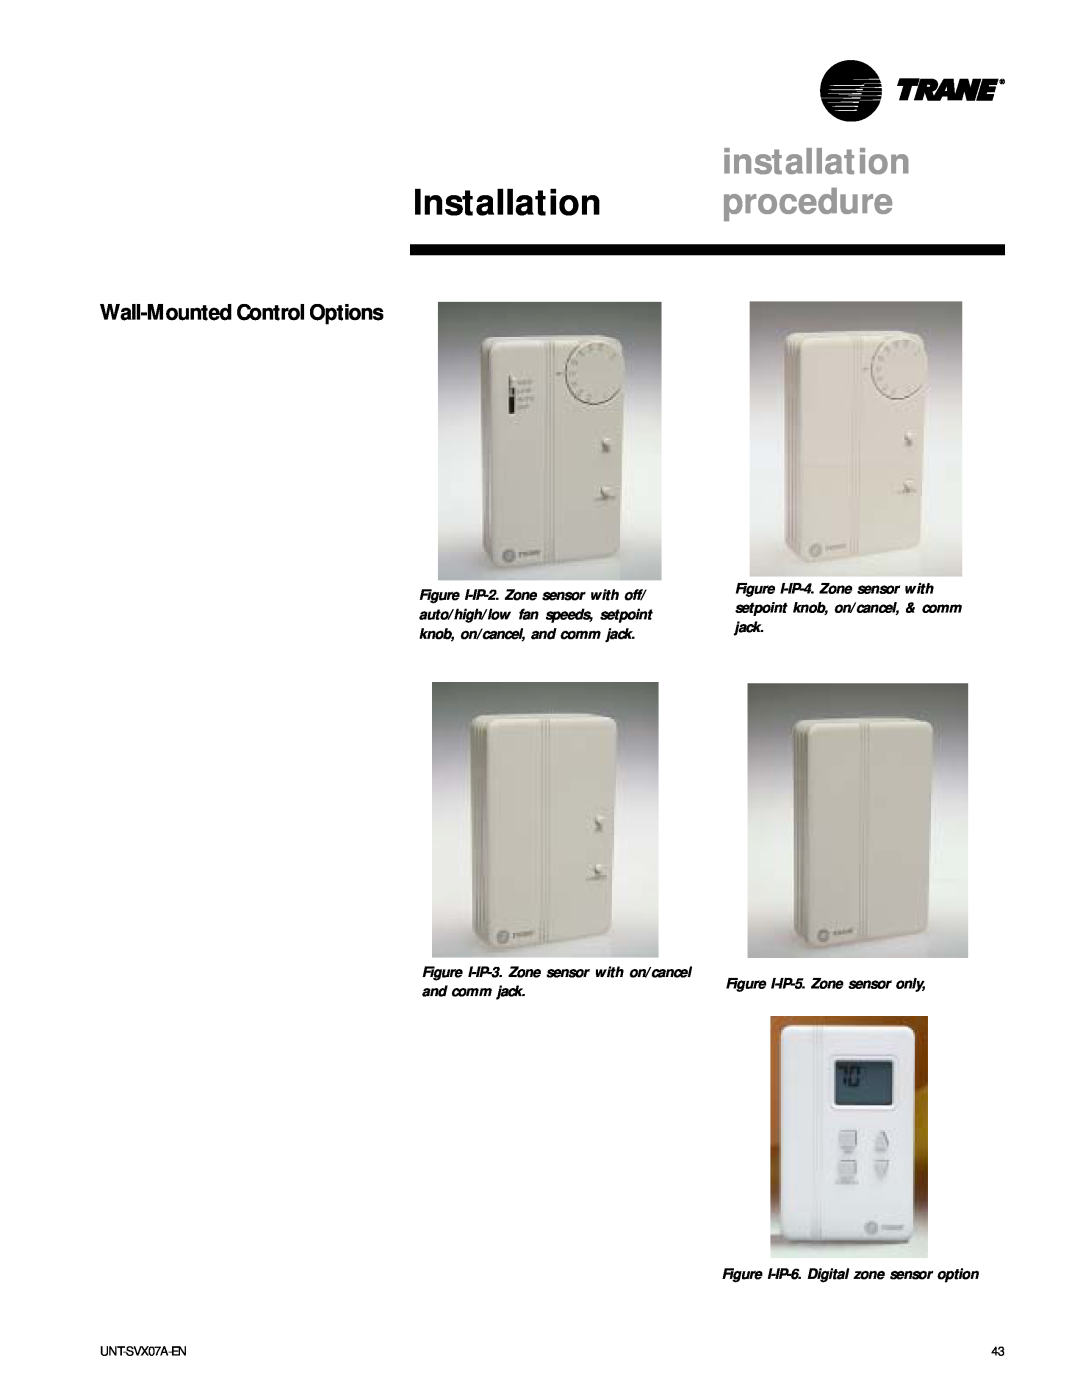 Trane UniTrane Fan-Coil & Force Flo Air Conditioners Wall-Mounted Control Options, installation, Installation procedure 